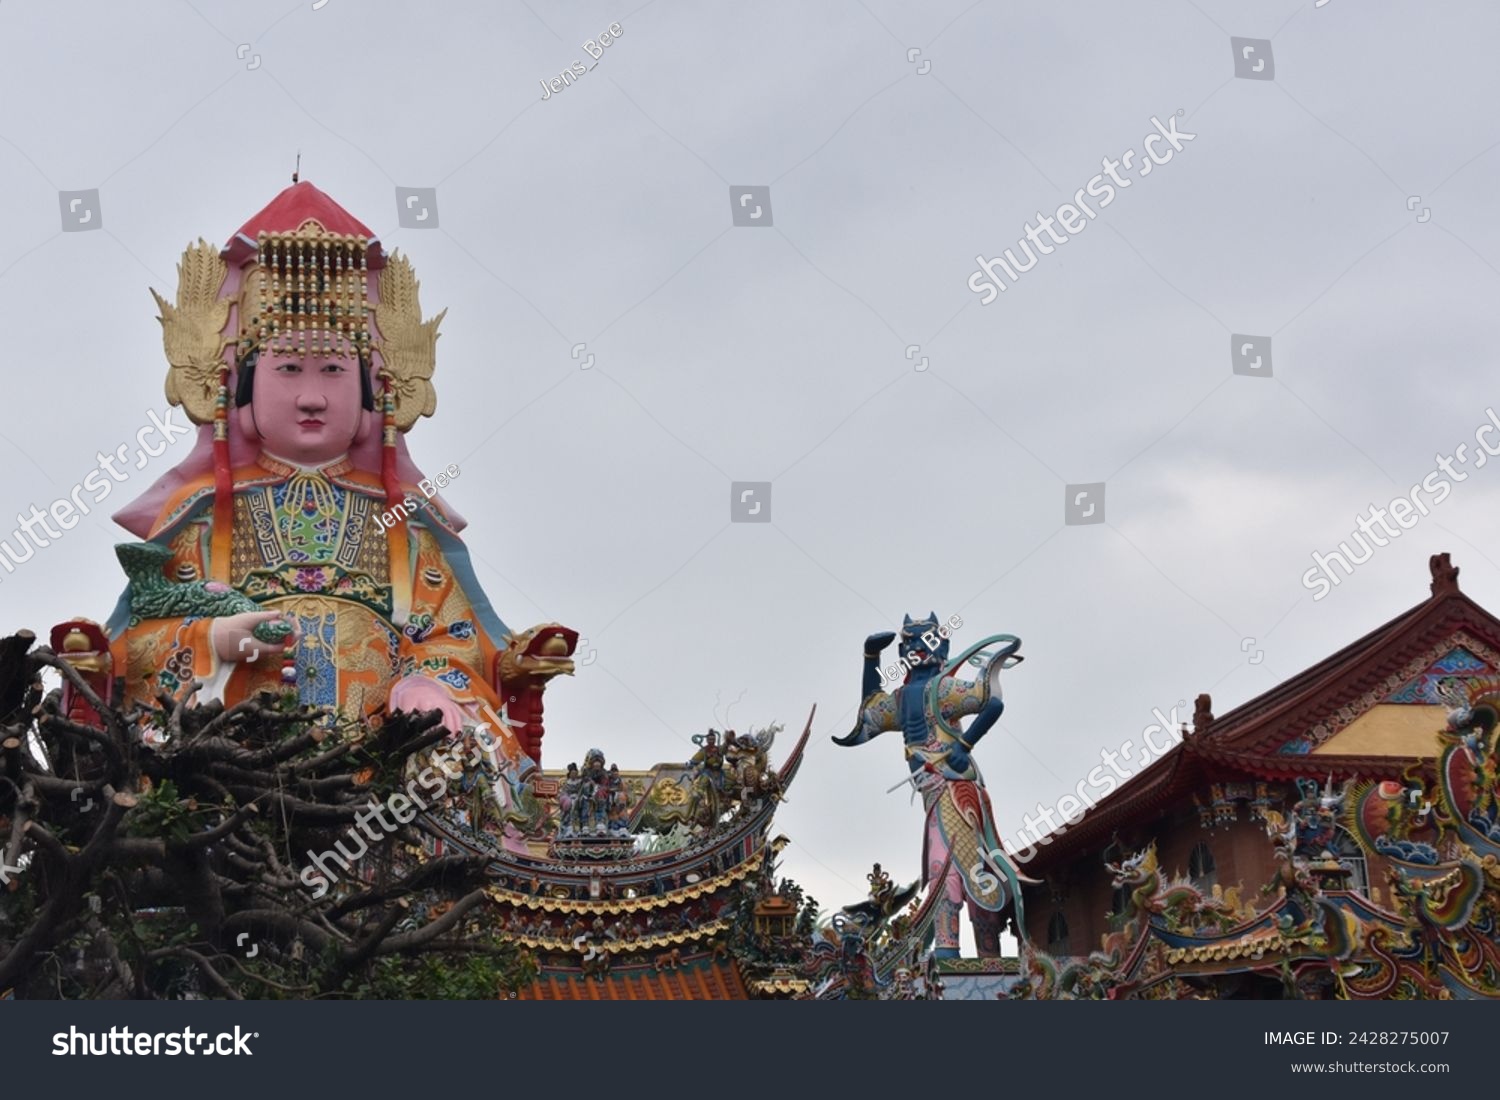 Colorful ancient dragon head statue, typical asian fantasy style, with religious oriental ornaments in spiritual traditional taiwanese Mazu Hotsu Longfong Temple in Miaoli City, Zhunan, Taiwan, Asia. #2428275007